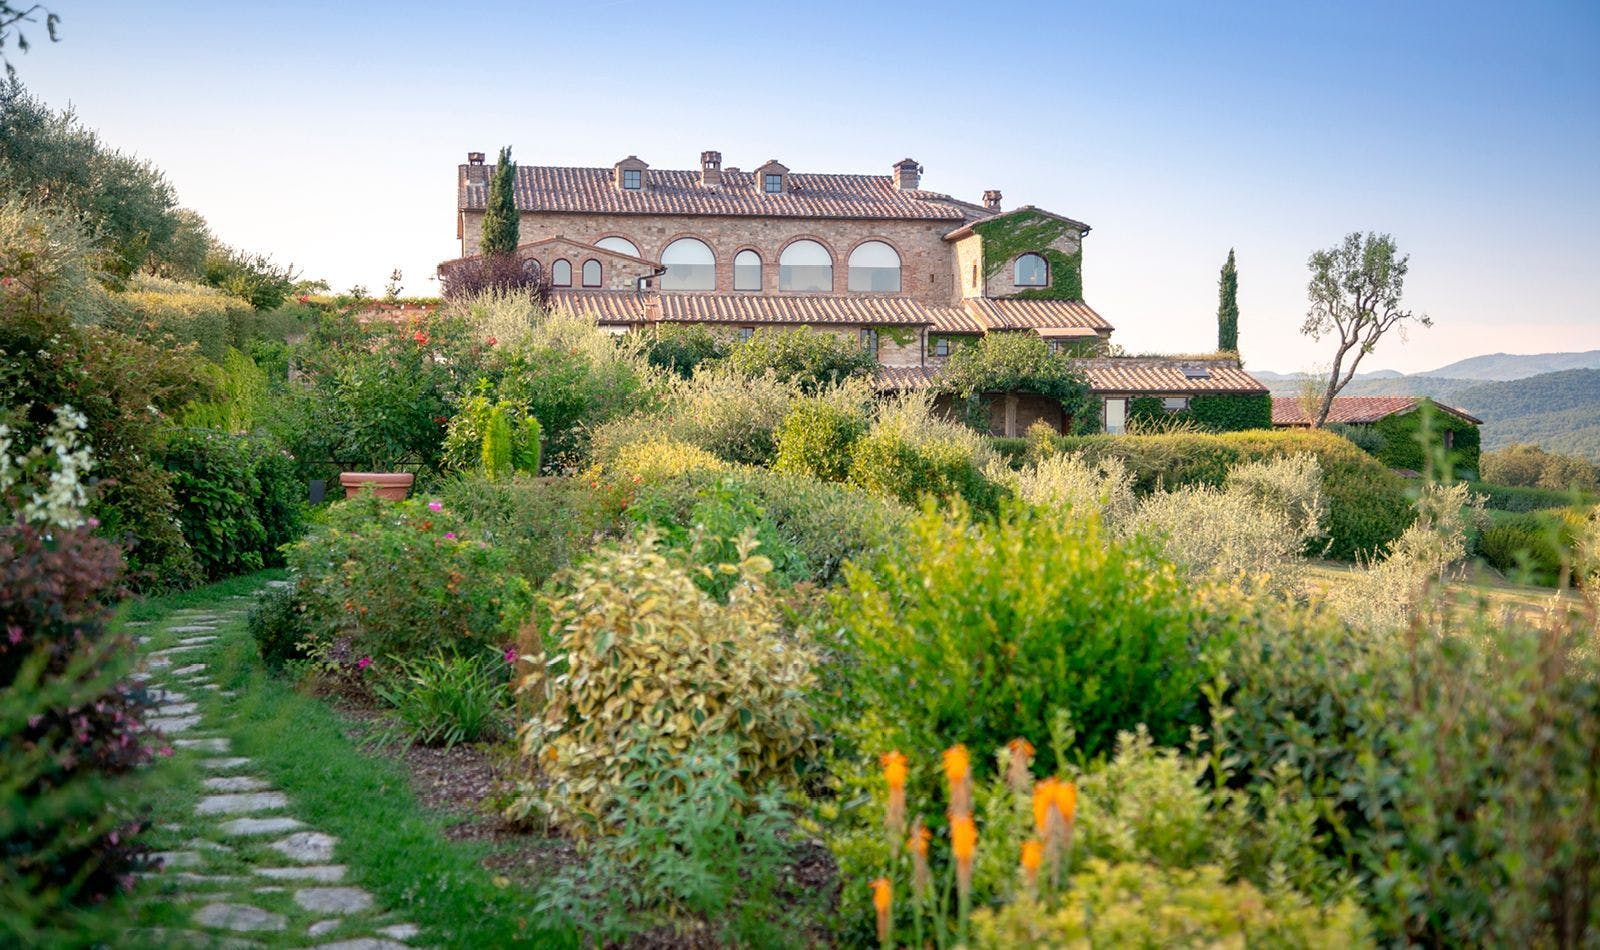 Tuscan countryside is perfect for romantic anniversary